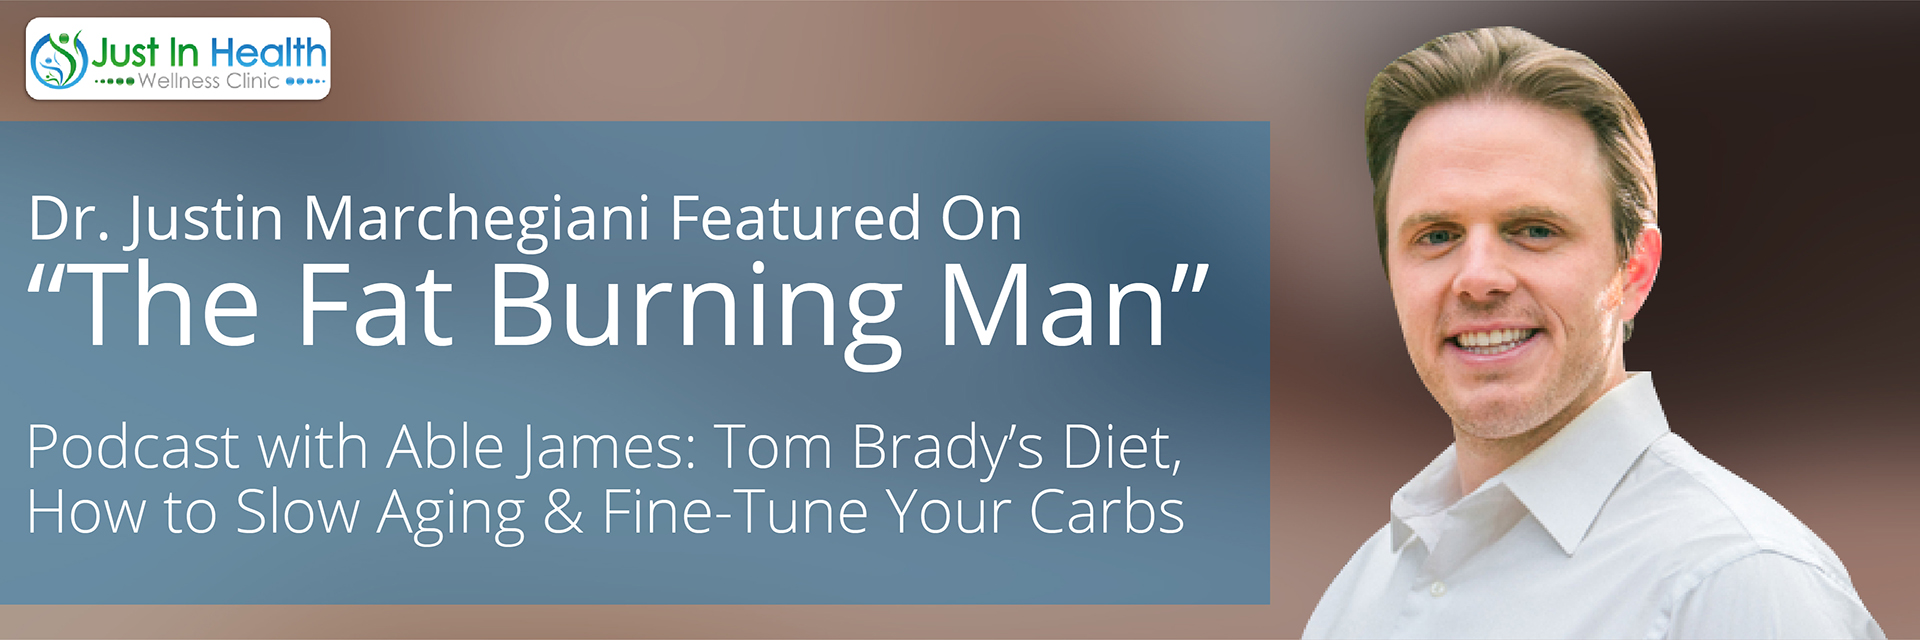 Dr. Justin Marchegiani Featured on "The Fat Burning Man" Podcast with Able James: Tom Brady’s Diet, How to Slow Aging & Fine-Tune Your Carbs